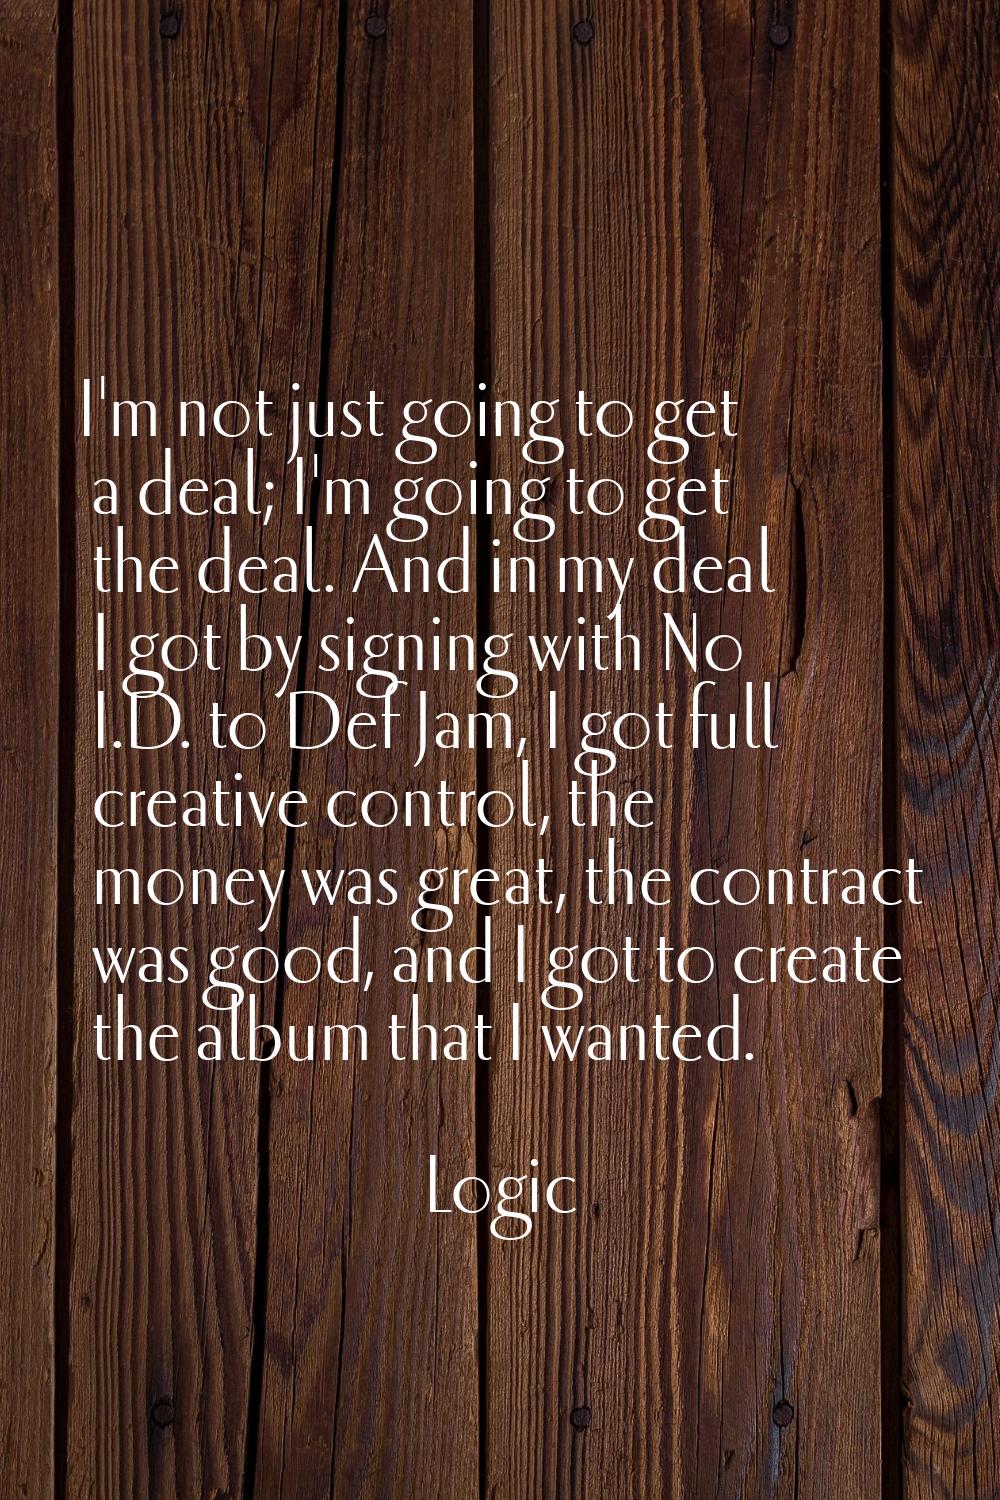 I'm not just going to get a deal; I'm going to get the deal. And in my deal I got by signing with N